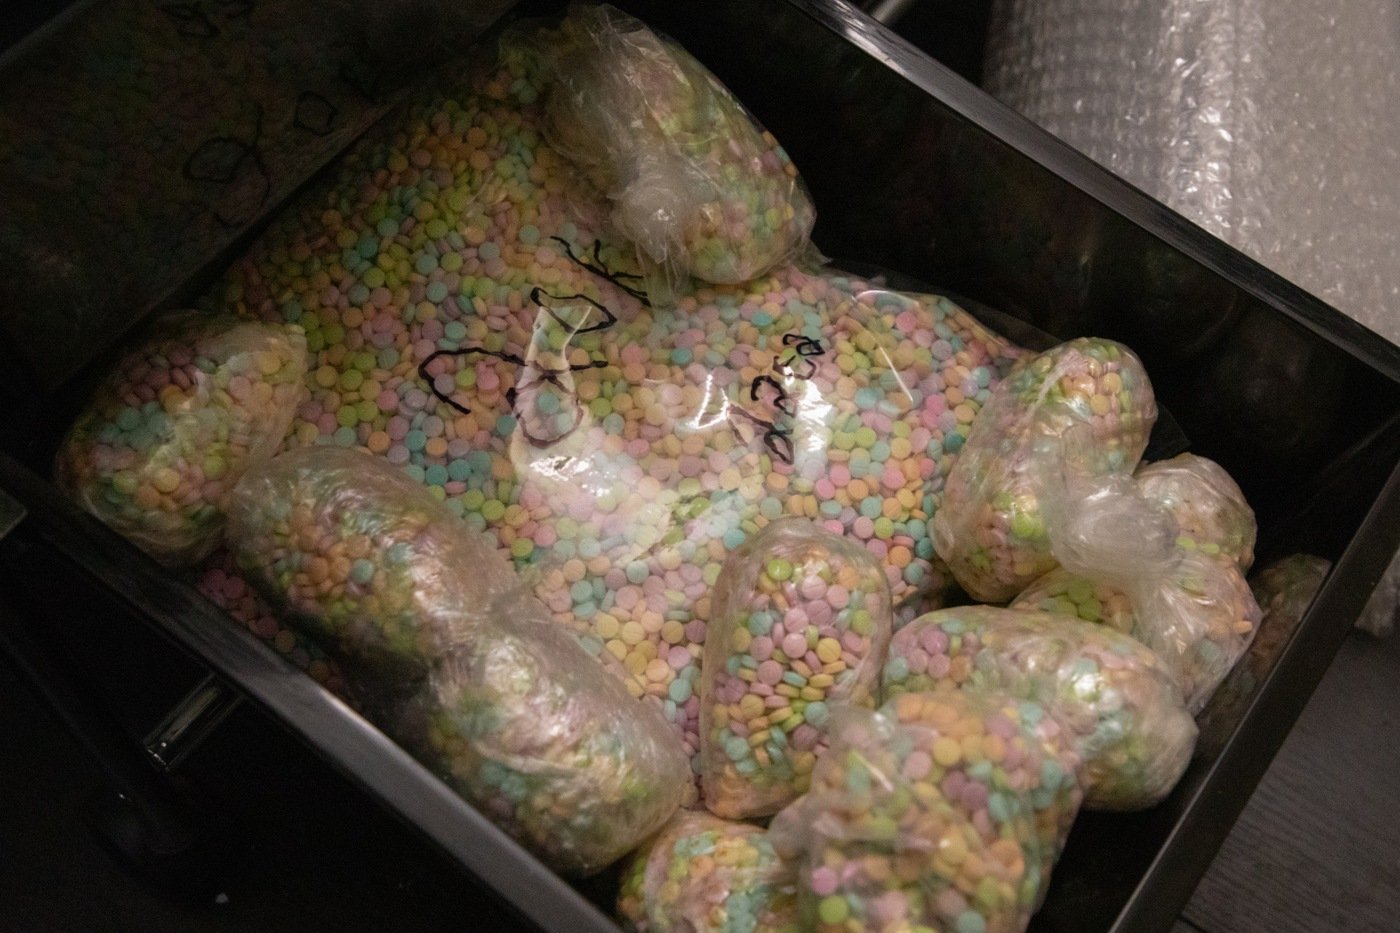 Fake pills are one of the drivers of a growing and alarming number of overdose deaths in the United States. These rainbow colored pills are often marketed to young people.